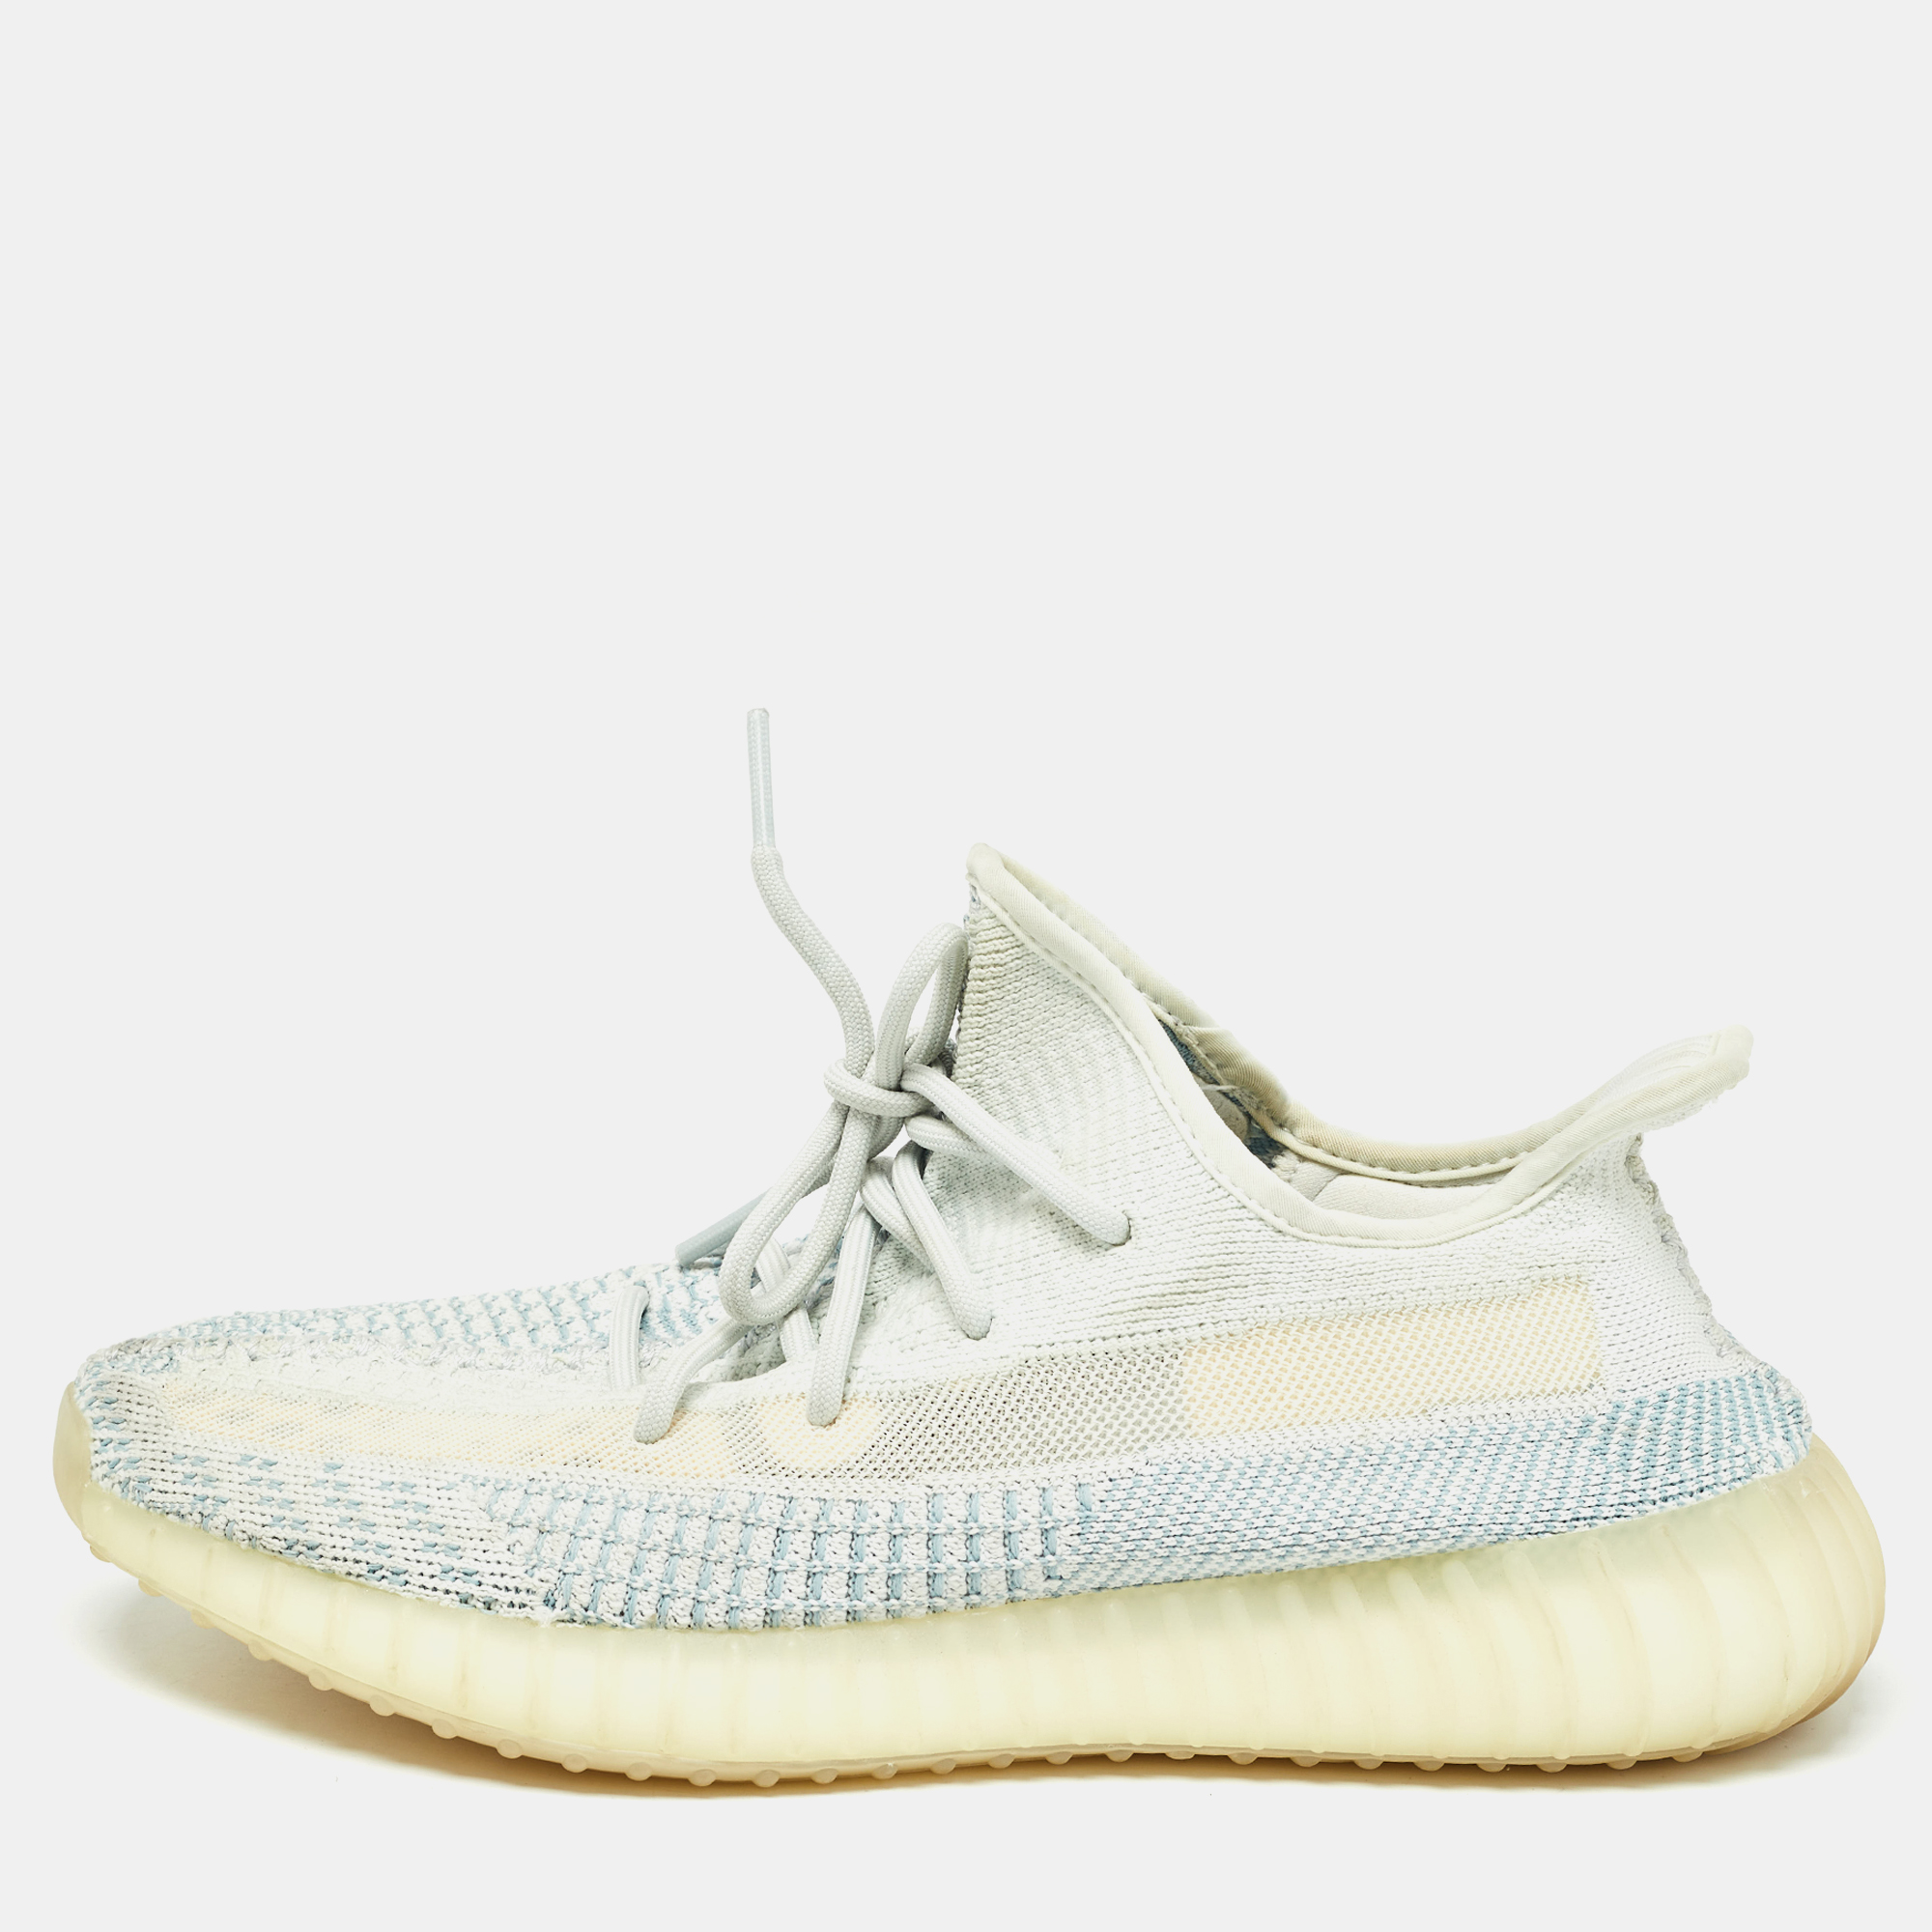 

Yeezy x Adidas White/Green Knit Fabric Boost 350 V2 Cloud White Non Reflective Sneakers Size